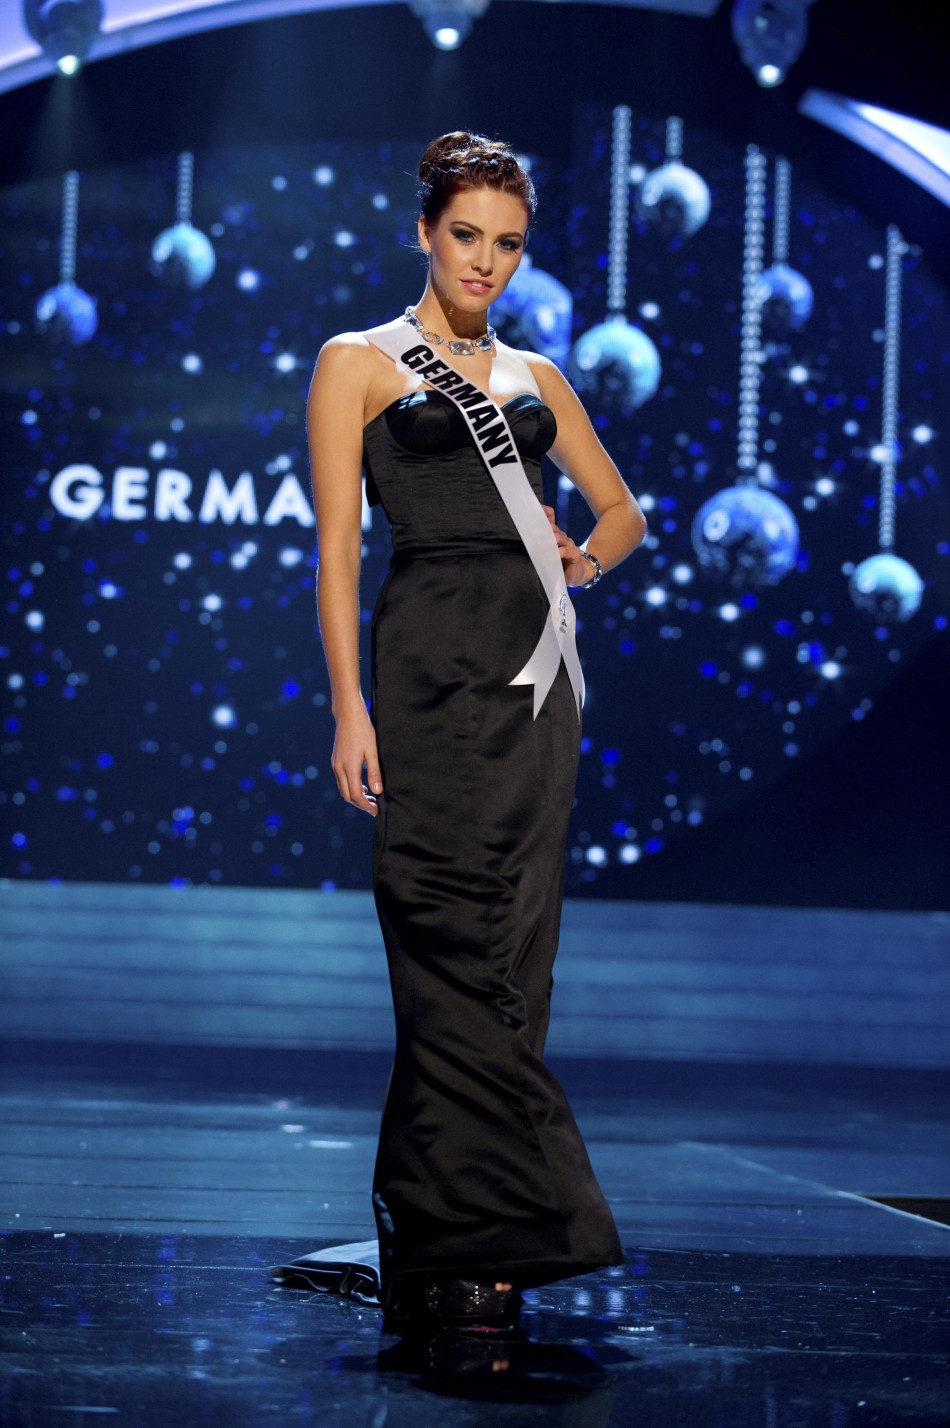 Miss Germany 2012 Endemann competes in an evening gown of her choice during the Evening Gown Competition of the 2012 Miss Universe Presentation Show in Las Vegas